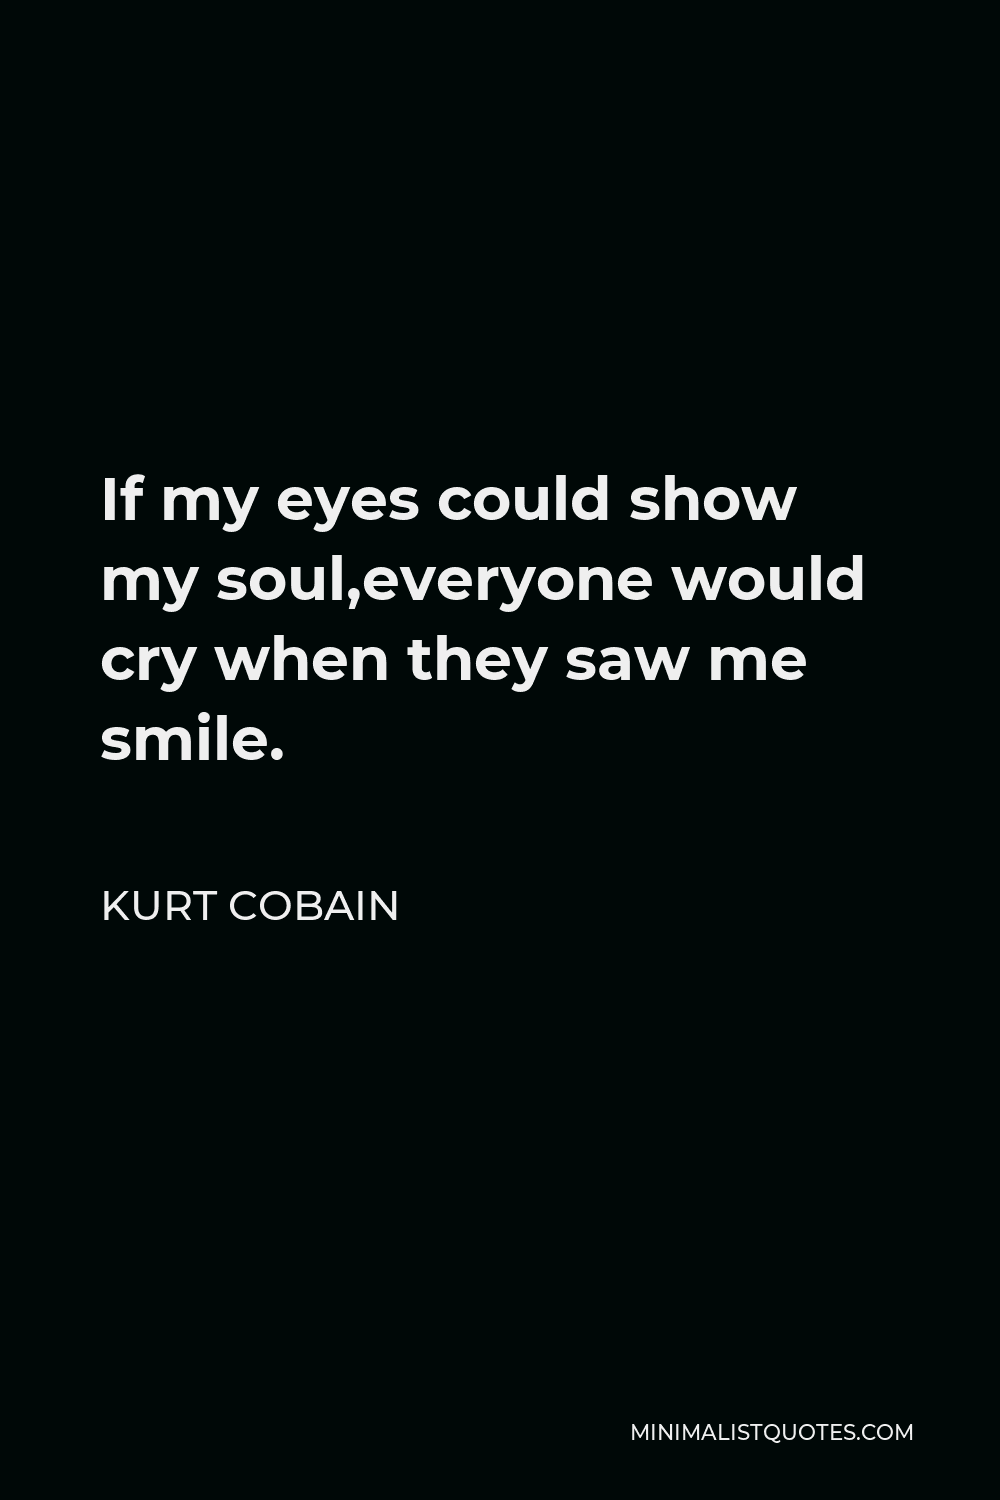 Kurt Cobain Quote - If my eyes could show my soul,everyone would cry when they saw me smile.